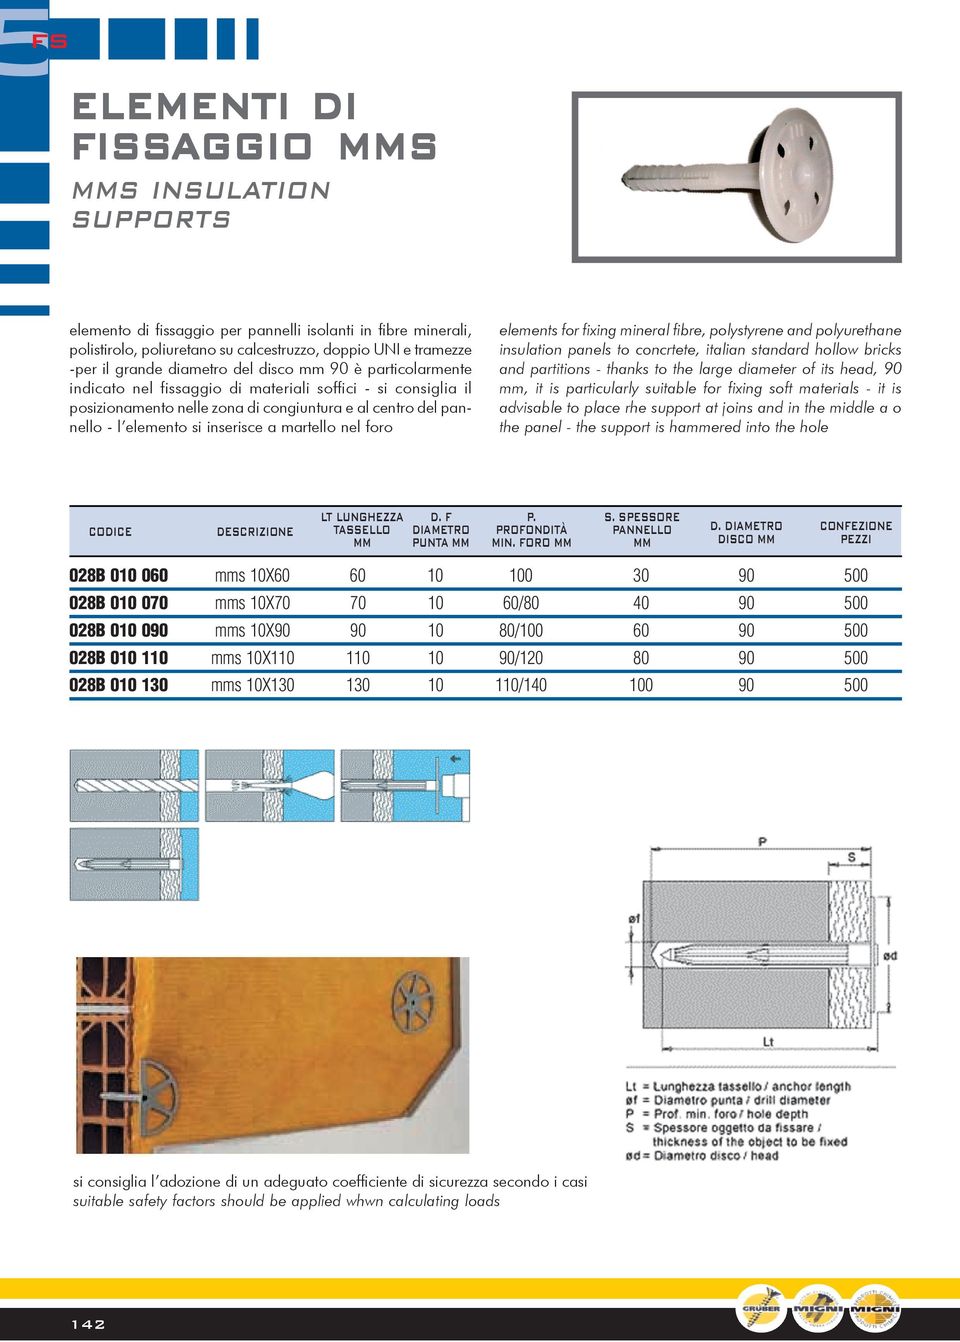 nel foro elements for fixing mineral fibre, polystyrene and polyurethane insulation panels to concrtete, italian standard hollow bricks and partitions - thanks to the large diameter of its head, 90